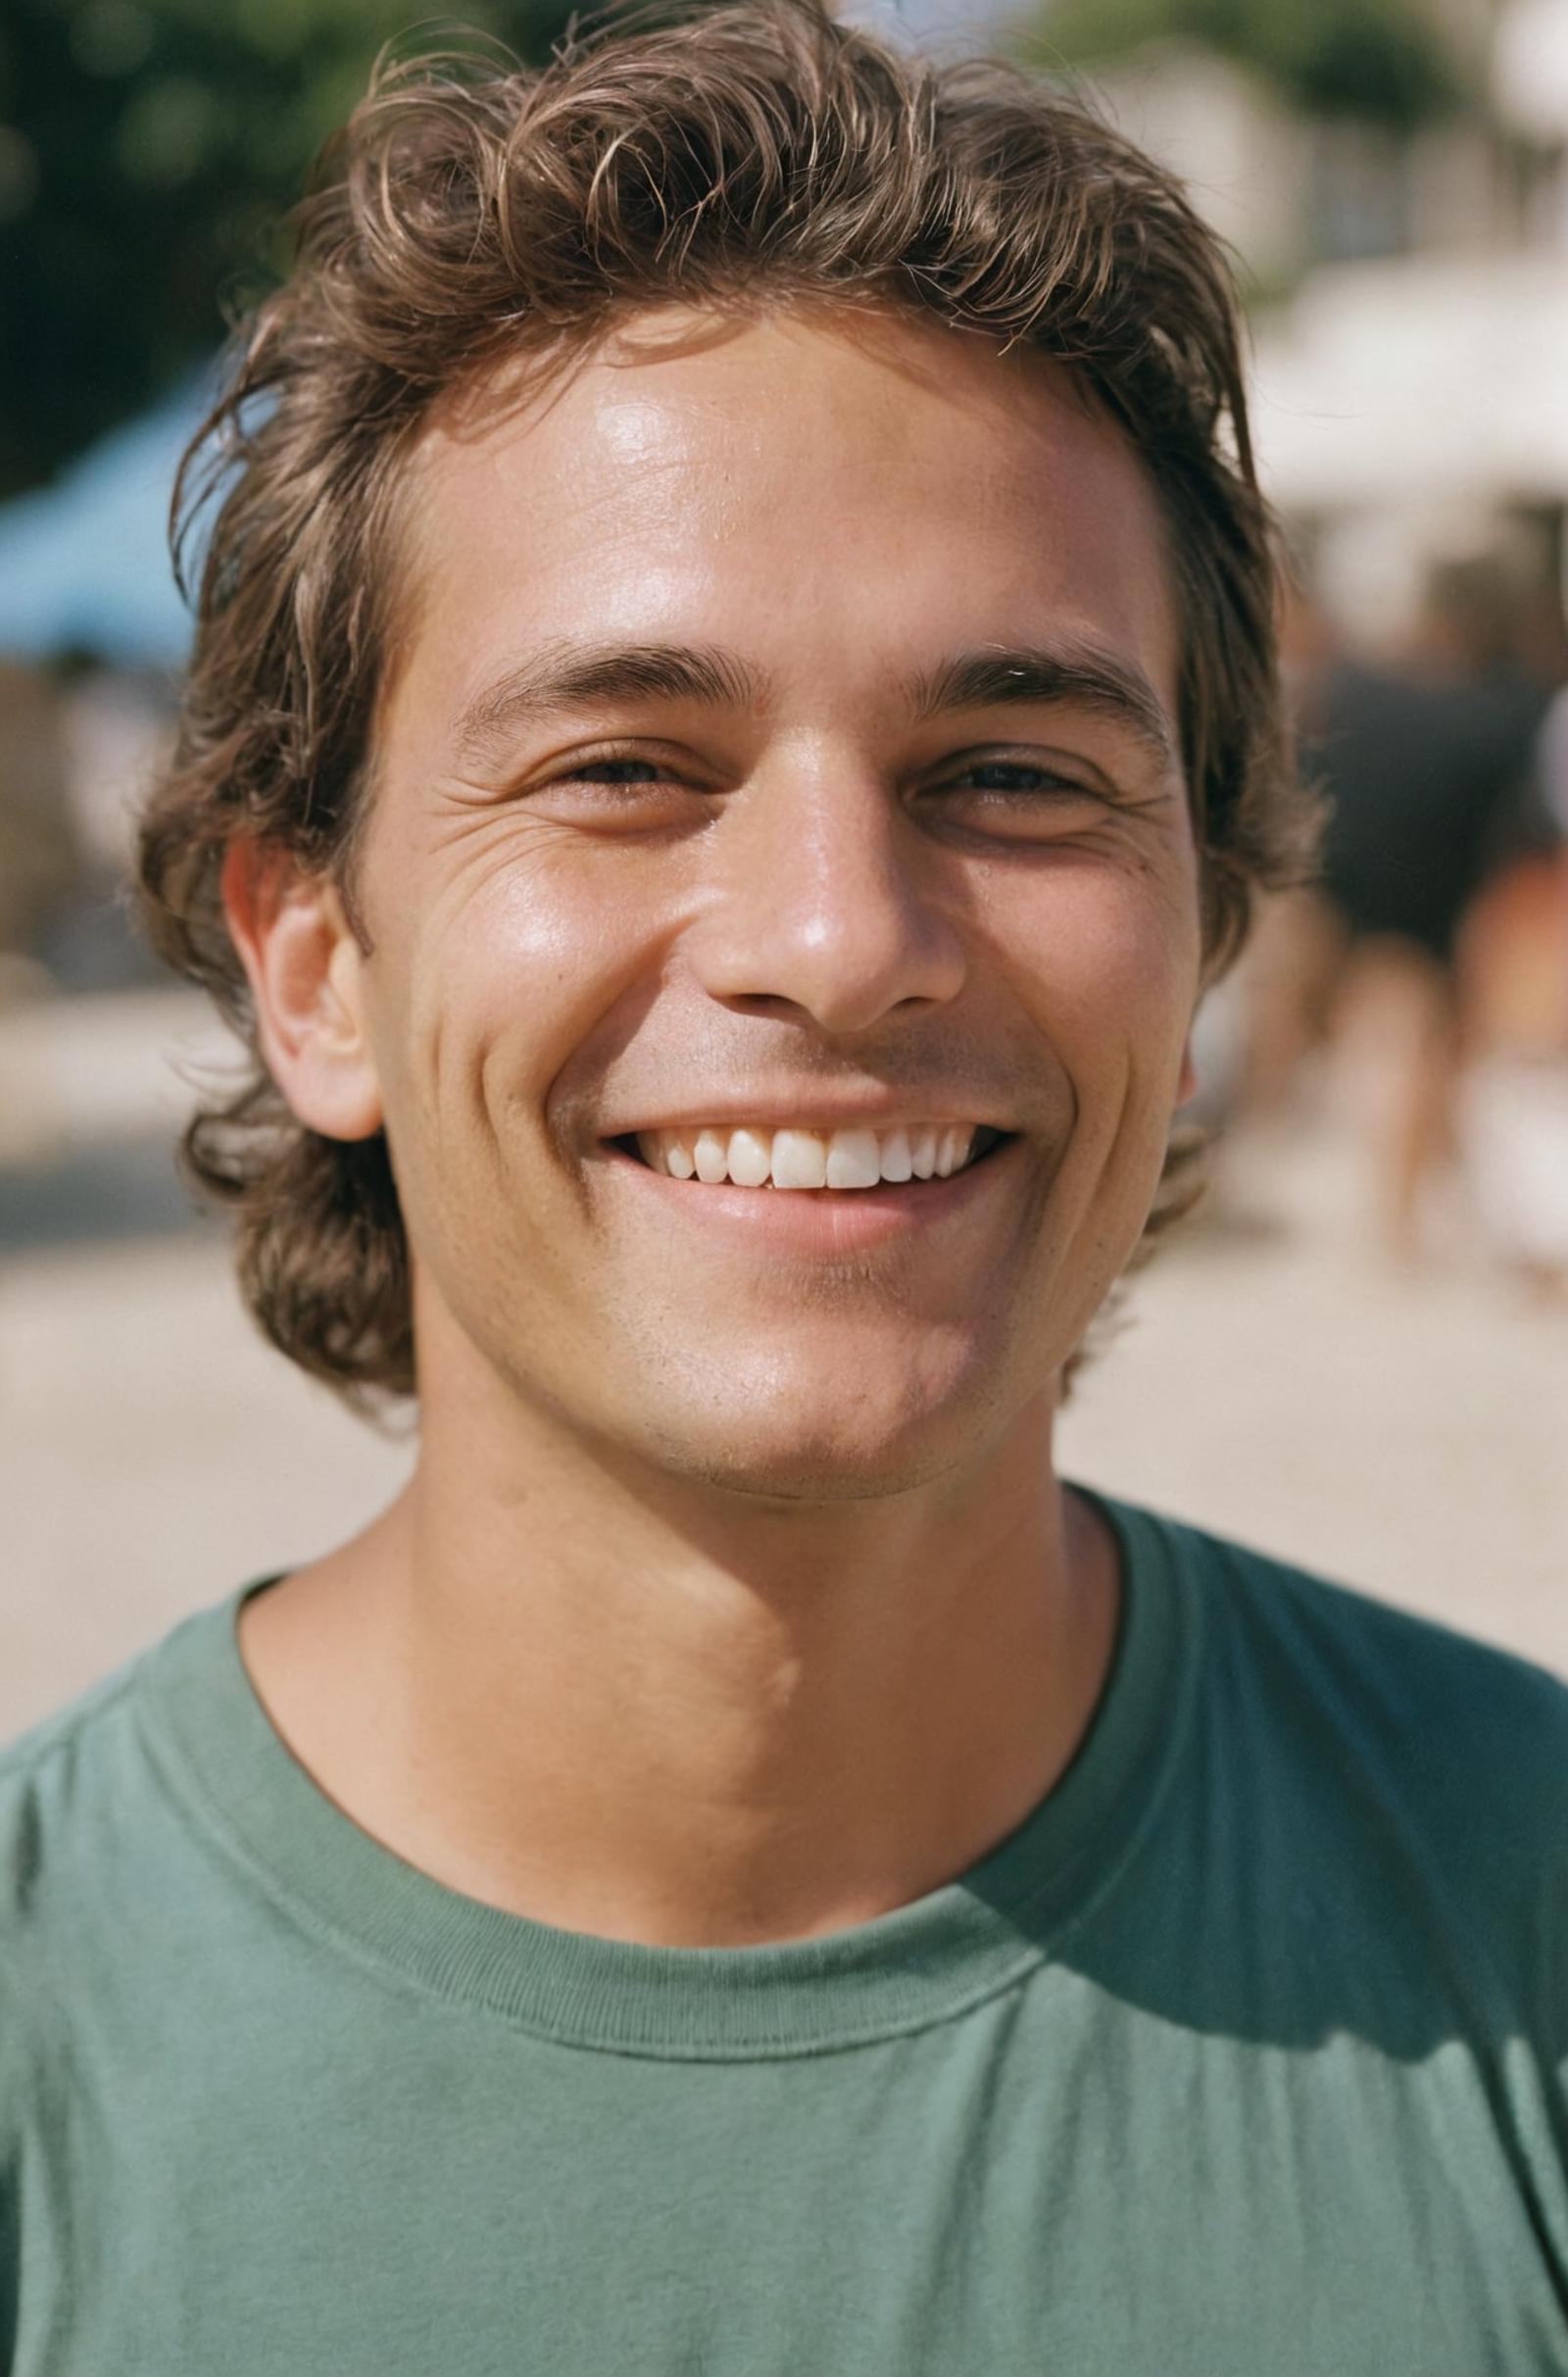 A man is smiling in a green shirt.